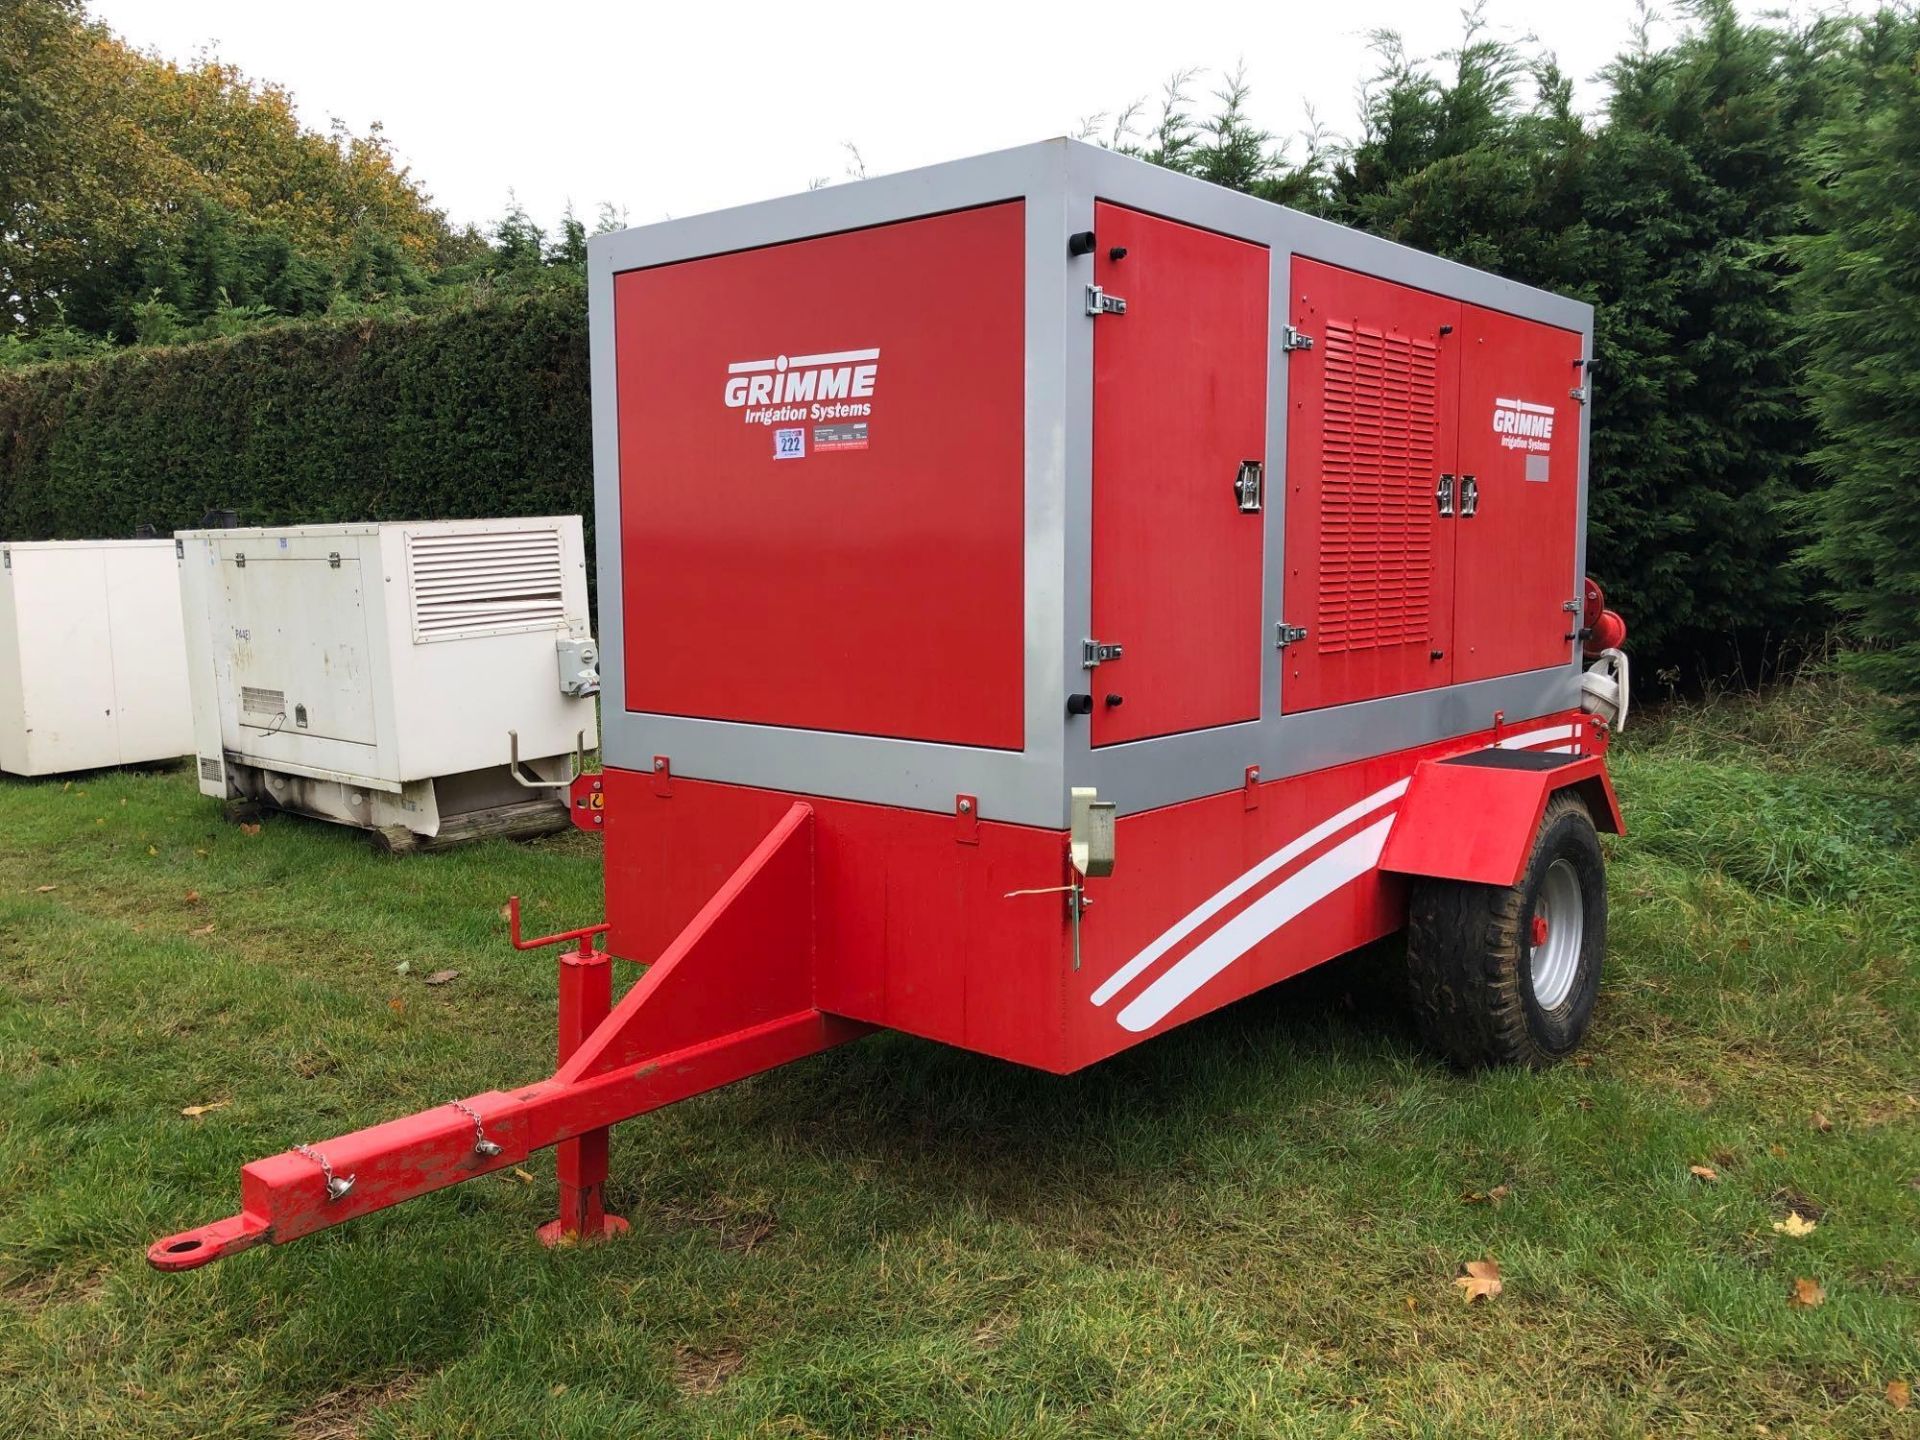 2019 Grimme GCEP125WHF irrigation pumpset with 6cyld FPT engine and Caprari pump, self-prime, GSM co